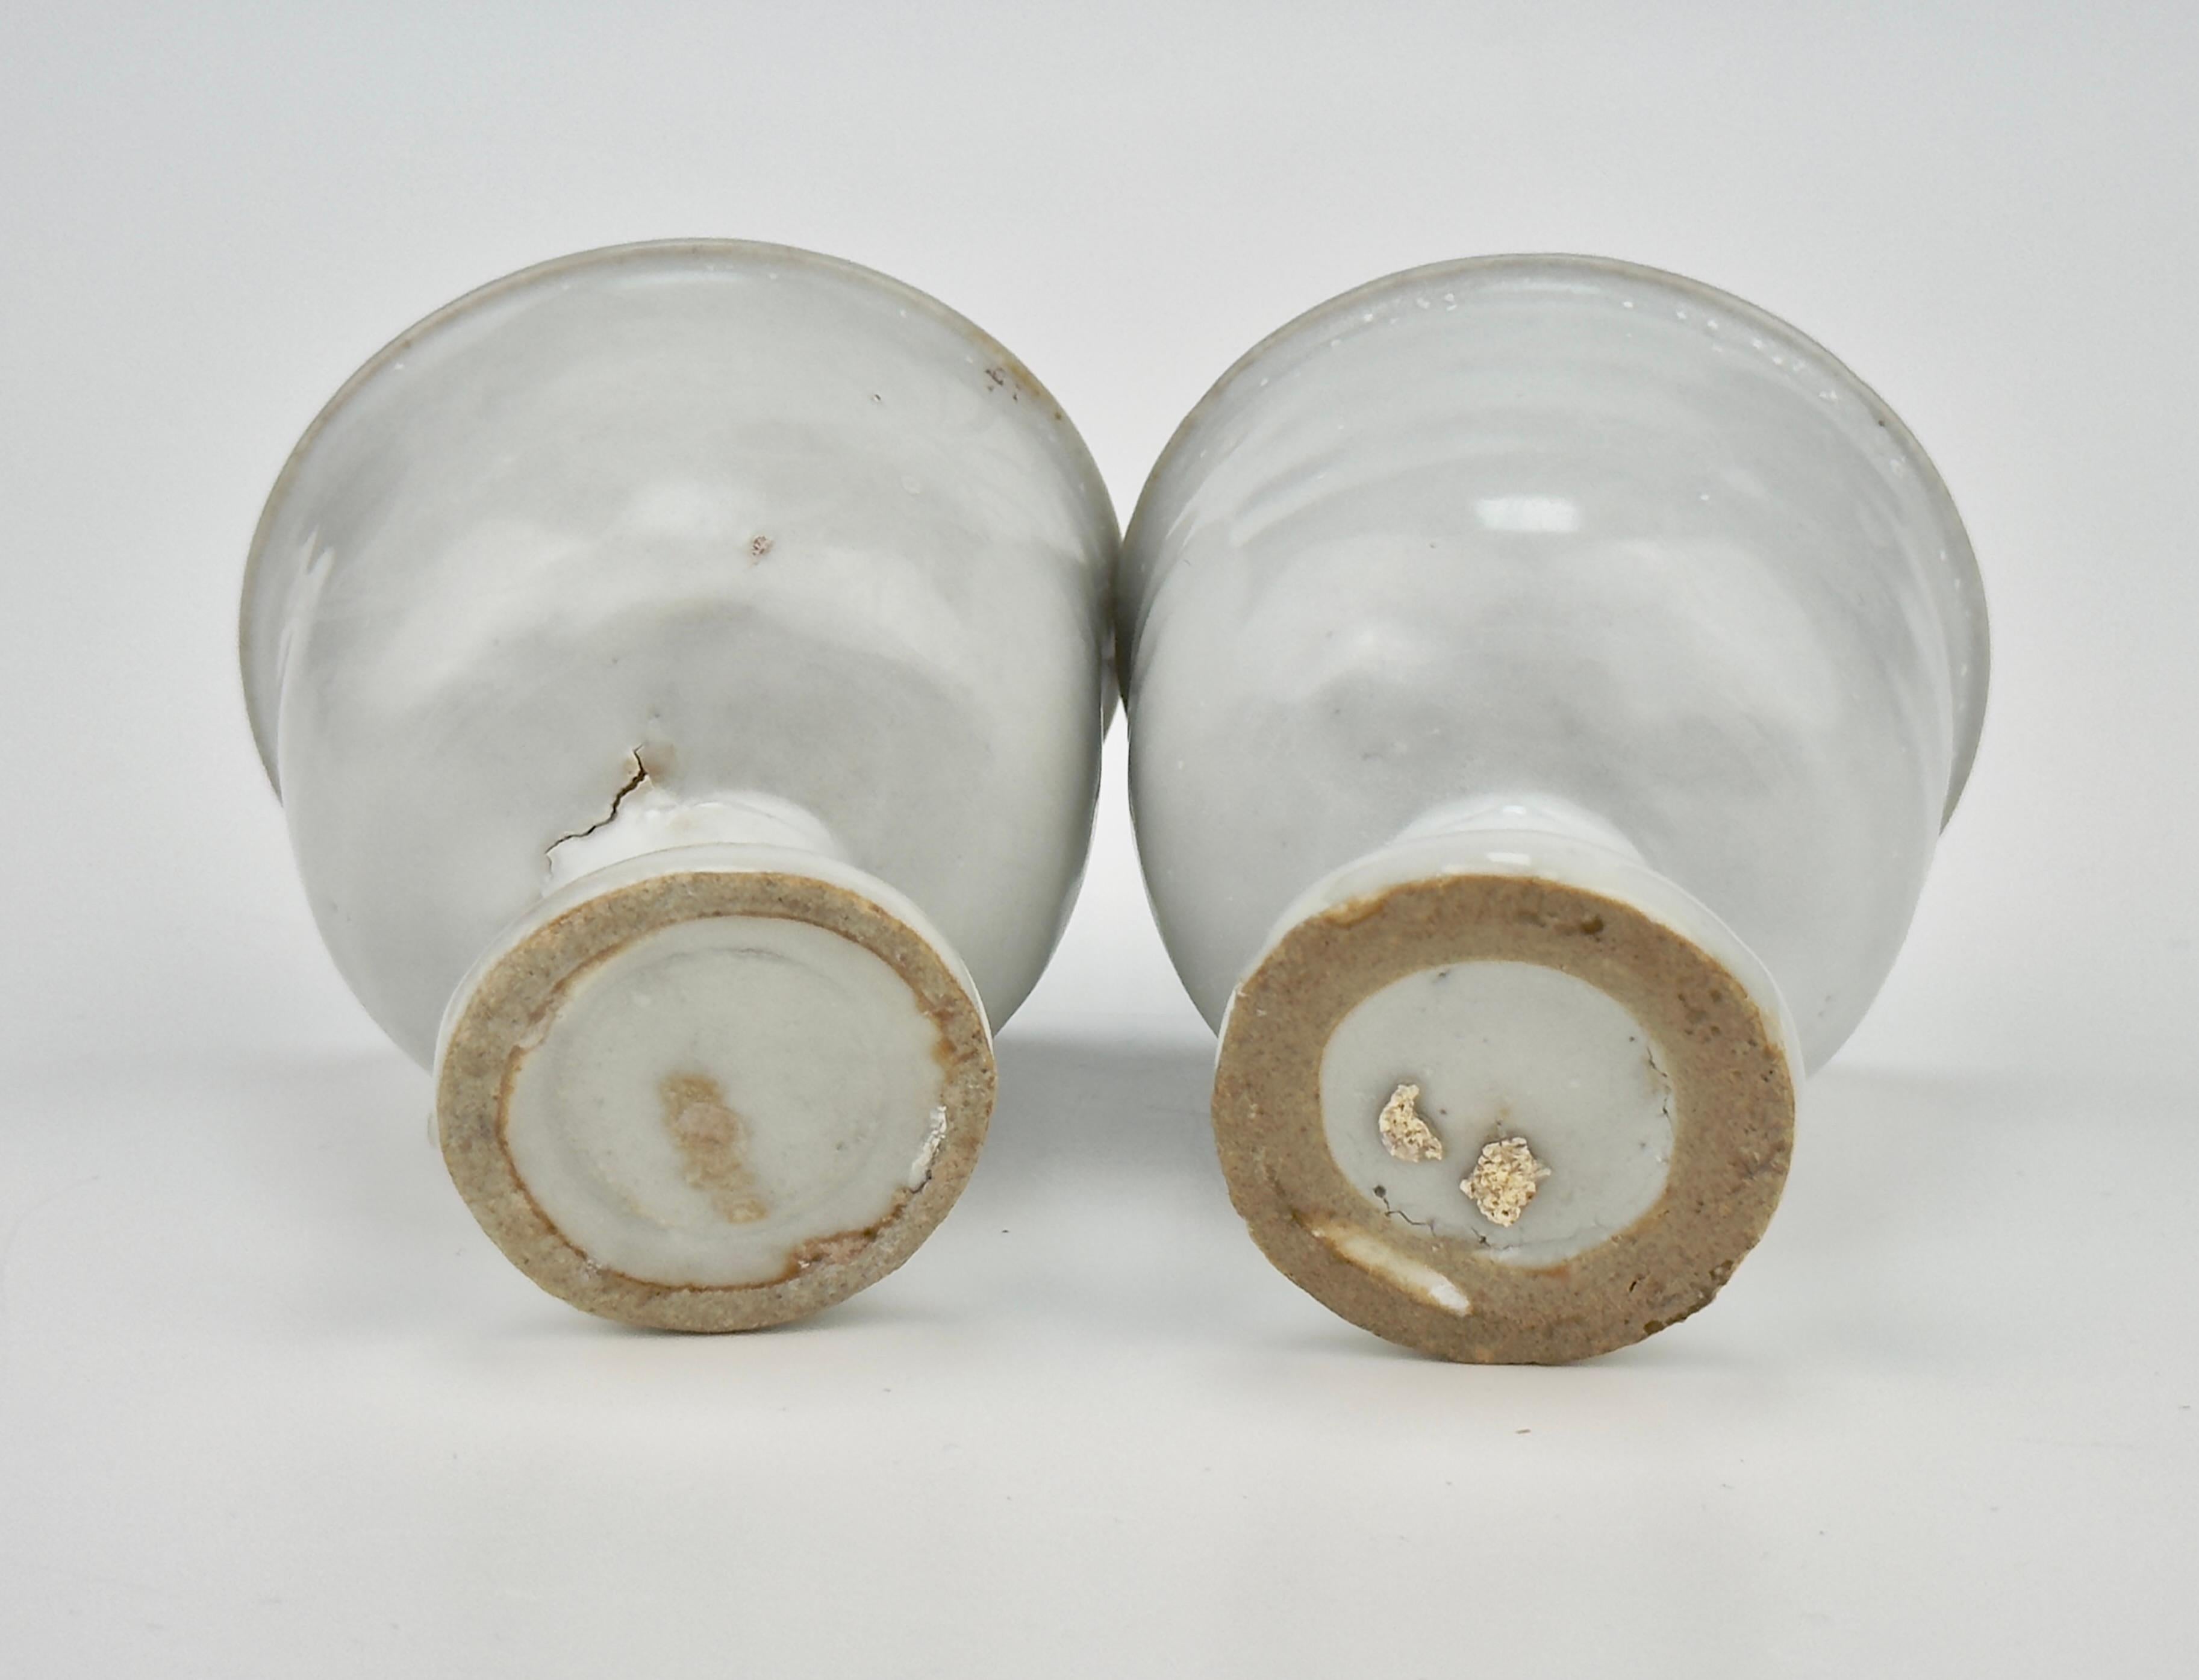 Pair of Small White porcelain Cup, Late Ming Era(16-17th Century) For Sale 2